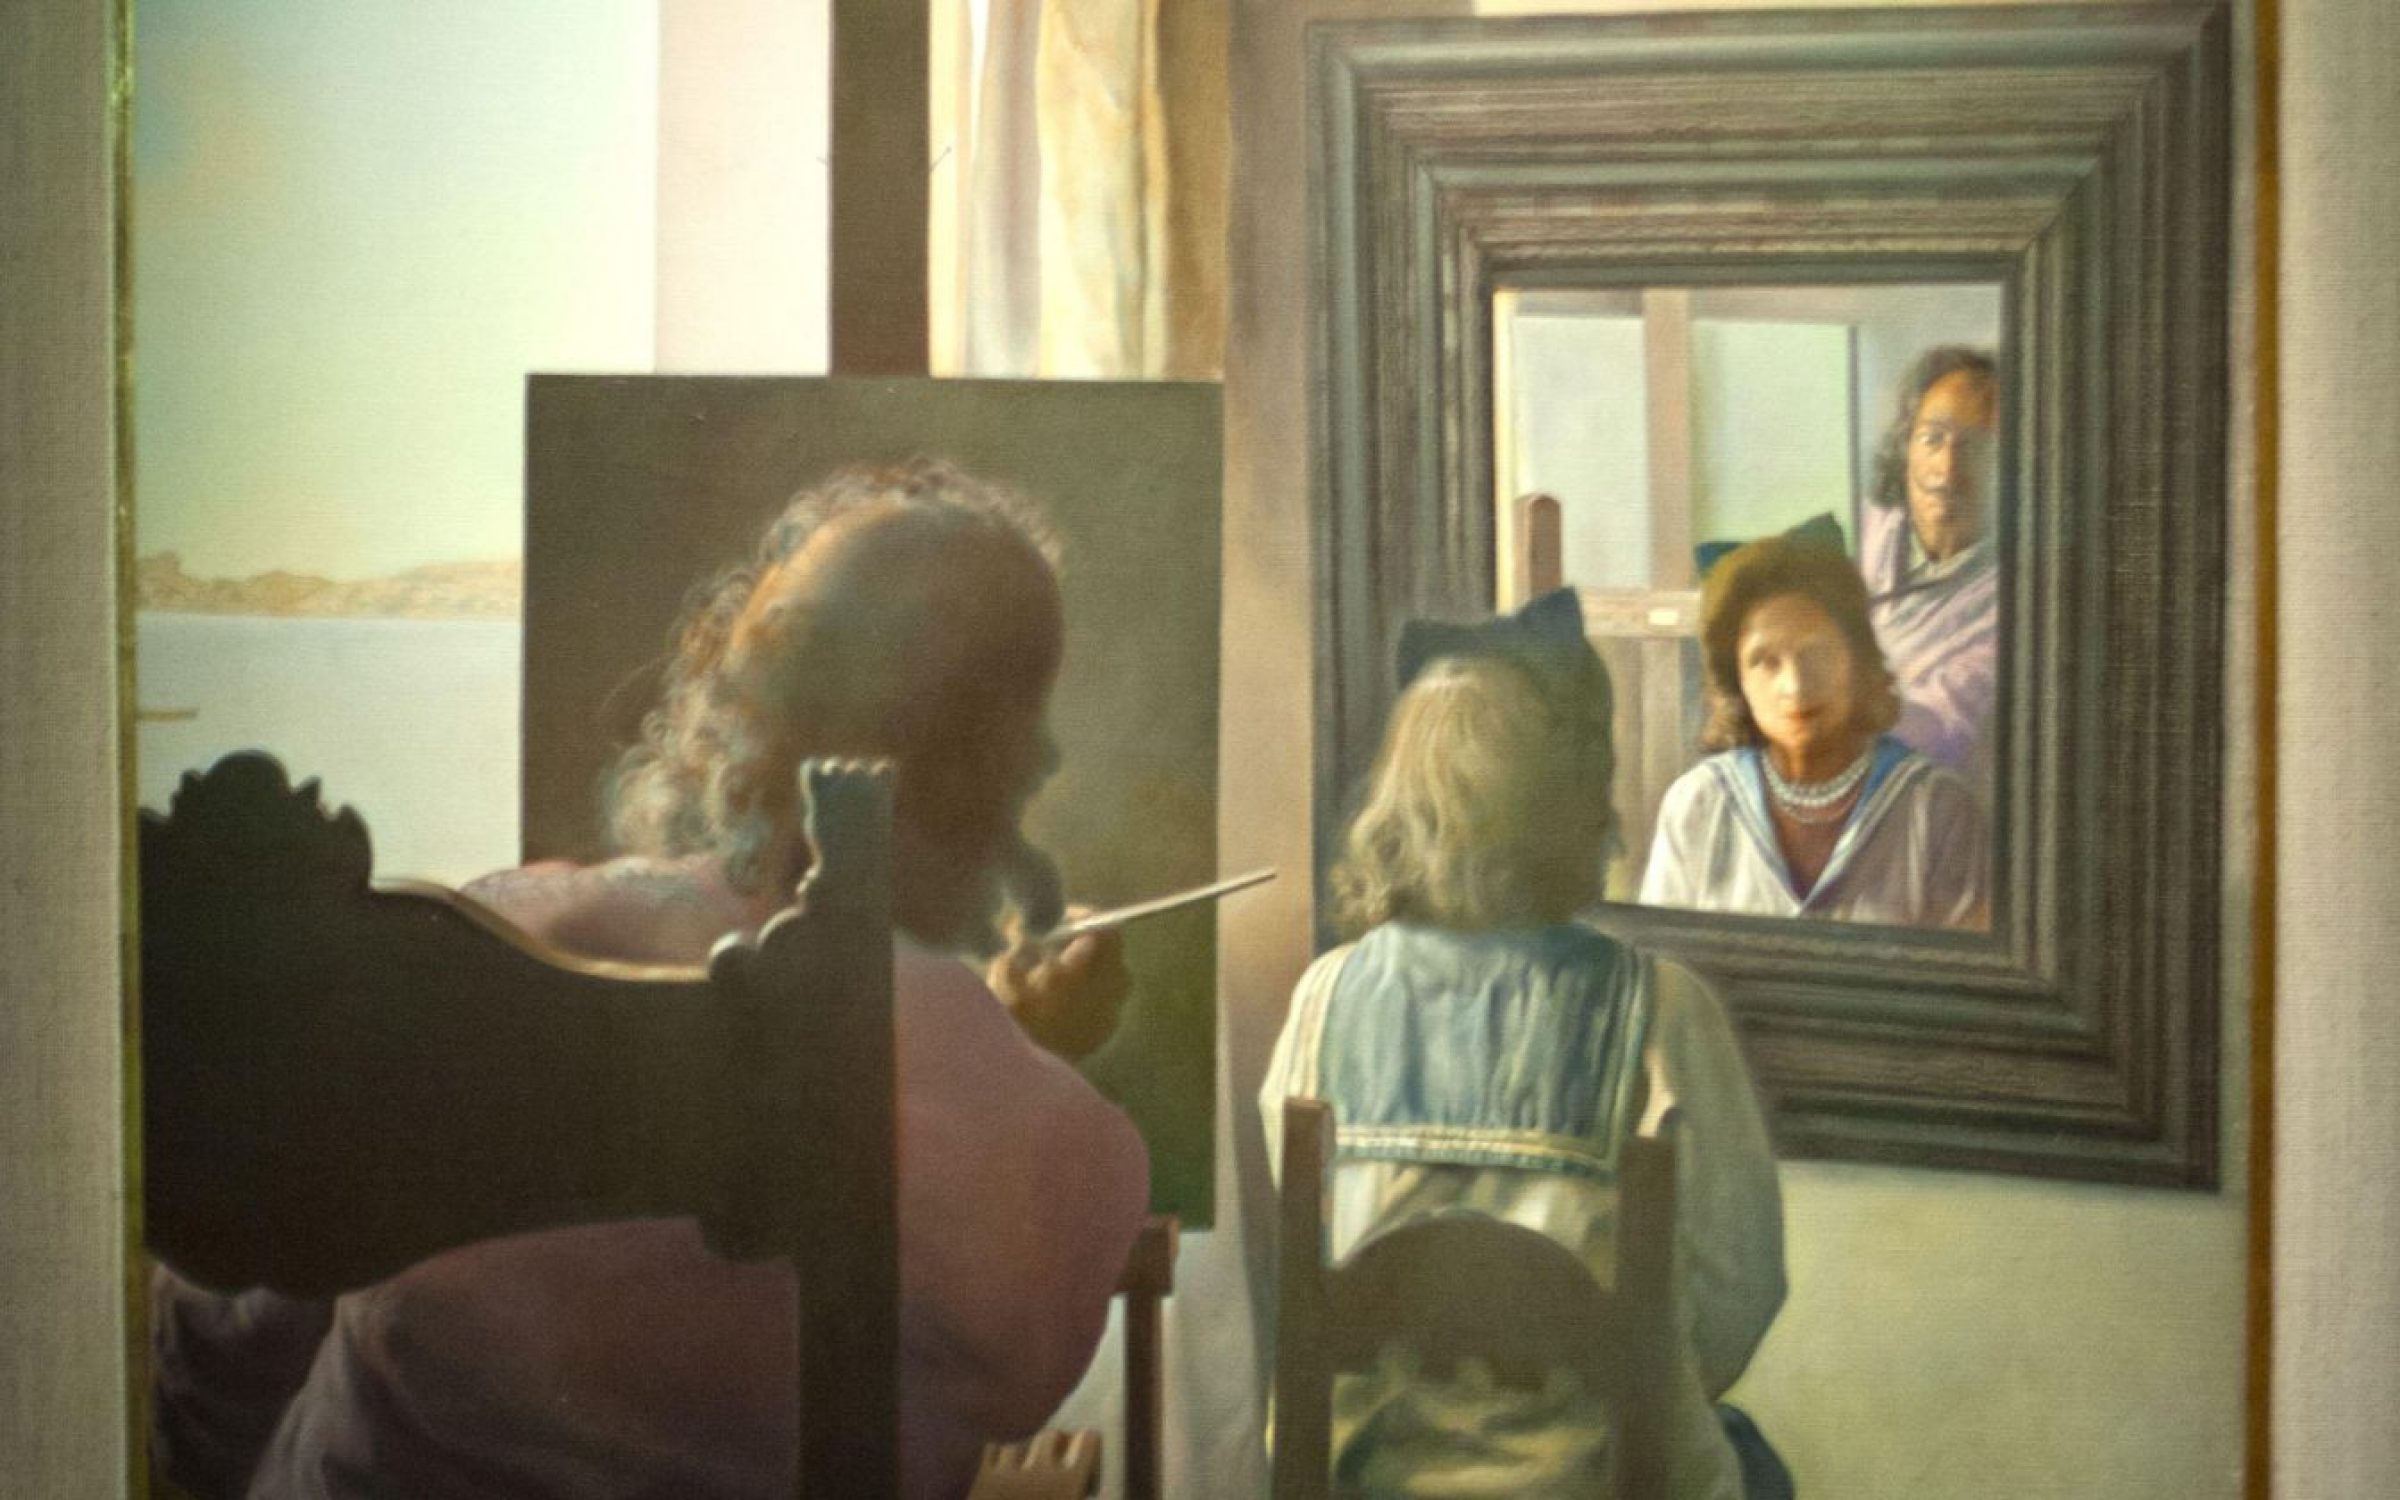 Dalí Theatre and Museum. Portrait of a portrait painter. Salvador Dali: Self Portrait, from Behind Gala, reflected in Mirror.